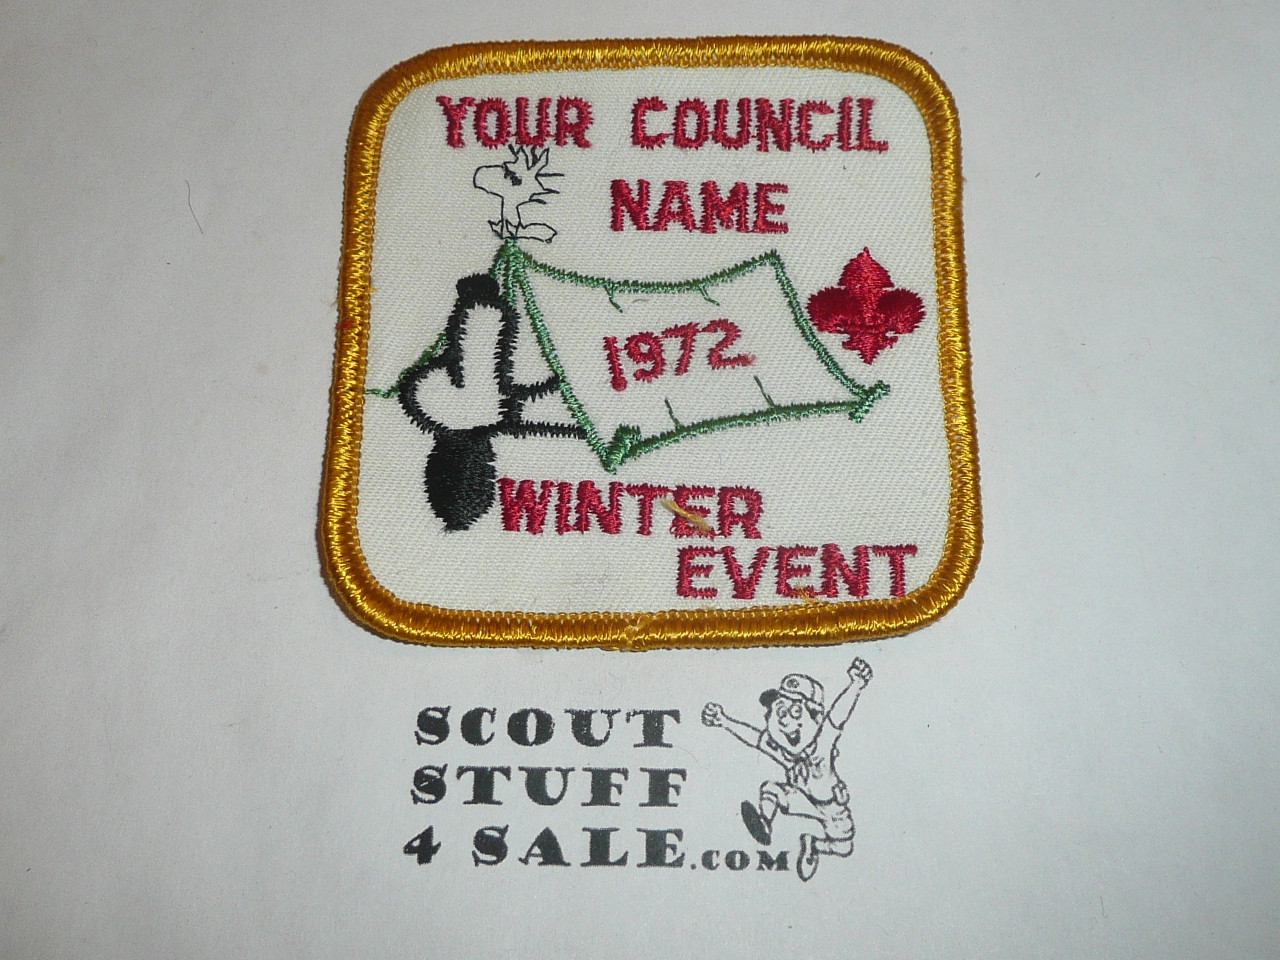 Your Council Name Sample Patch, 1972 Winter Event